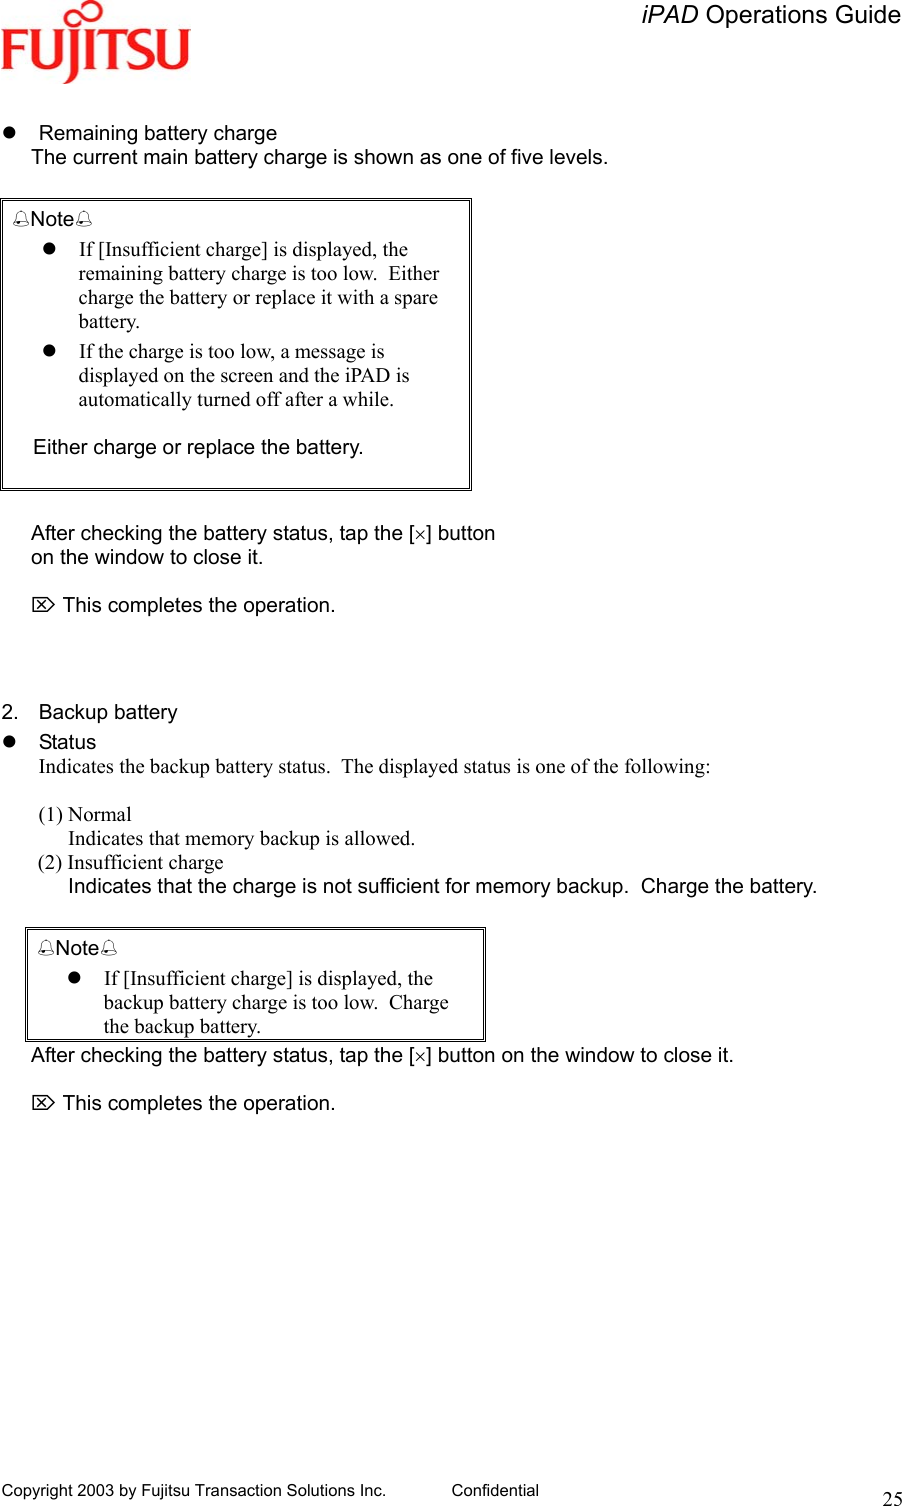   iPAD Operations Guide   Copyright 2003 by Fujitsu Transaction Solutions Inc. Confidential  25   Remaining battery charge The current main battery charge is shown as one of five levels.  Note  If [Insufficient charge] is displayed, the remaining battery charge is too low.  Either charge the battery or replace it with a spare battery.  If the charge is too low, a message is displayed on the screen and the iPAD is automatically turned off after a while.  Either charge or replace the battery.   After checking the battery status, tap the [×] button  on the window to close it.  ⌦ This completes the operation.    2. Backup battery  Status Indicates the backup battery status.  The displayed status is one of the following:  (1) Normal   Indicates that memory backup is allowed.        (2) Insufficient charge Indicates that the charge is not sufficient for memory backup.  Charge the battery.  Note  If [Insufficient charge] is displayed, the backup battery charge is too low.  Charge the backup battery. After checking the battery status, tap the [×] button on the window to close it.  ⌦ This completes the operation. 